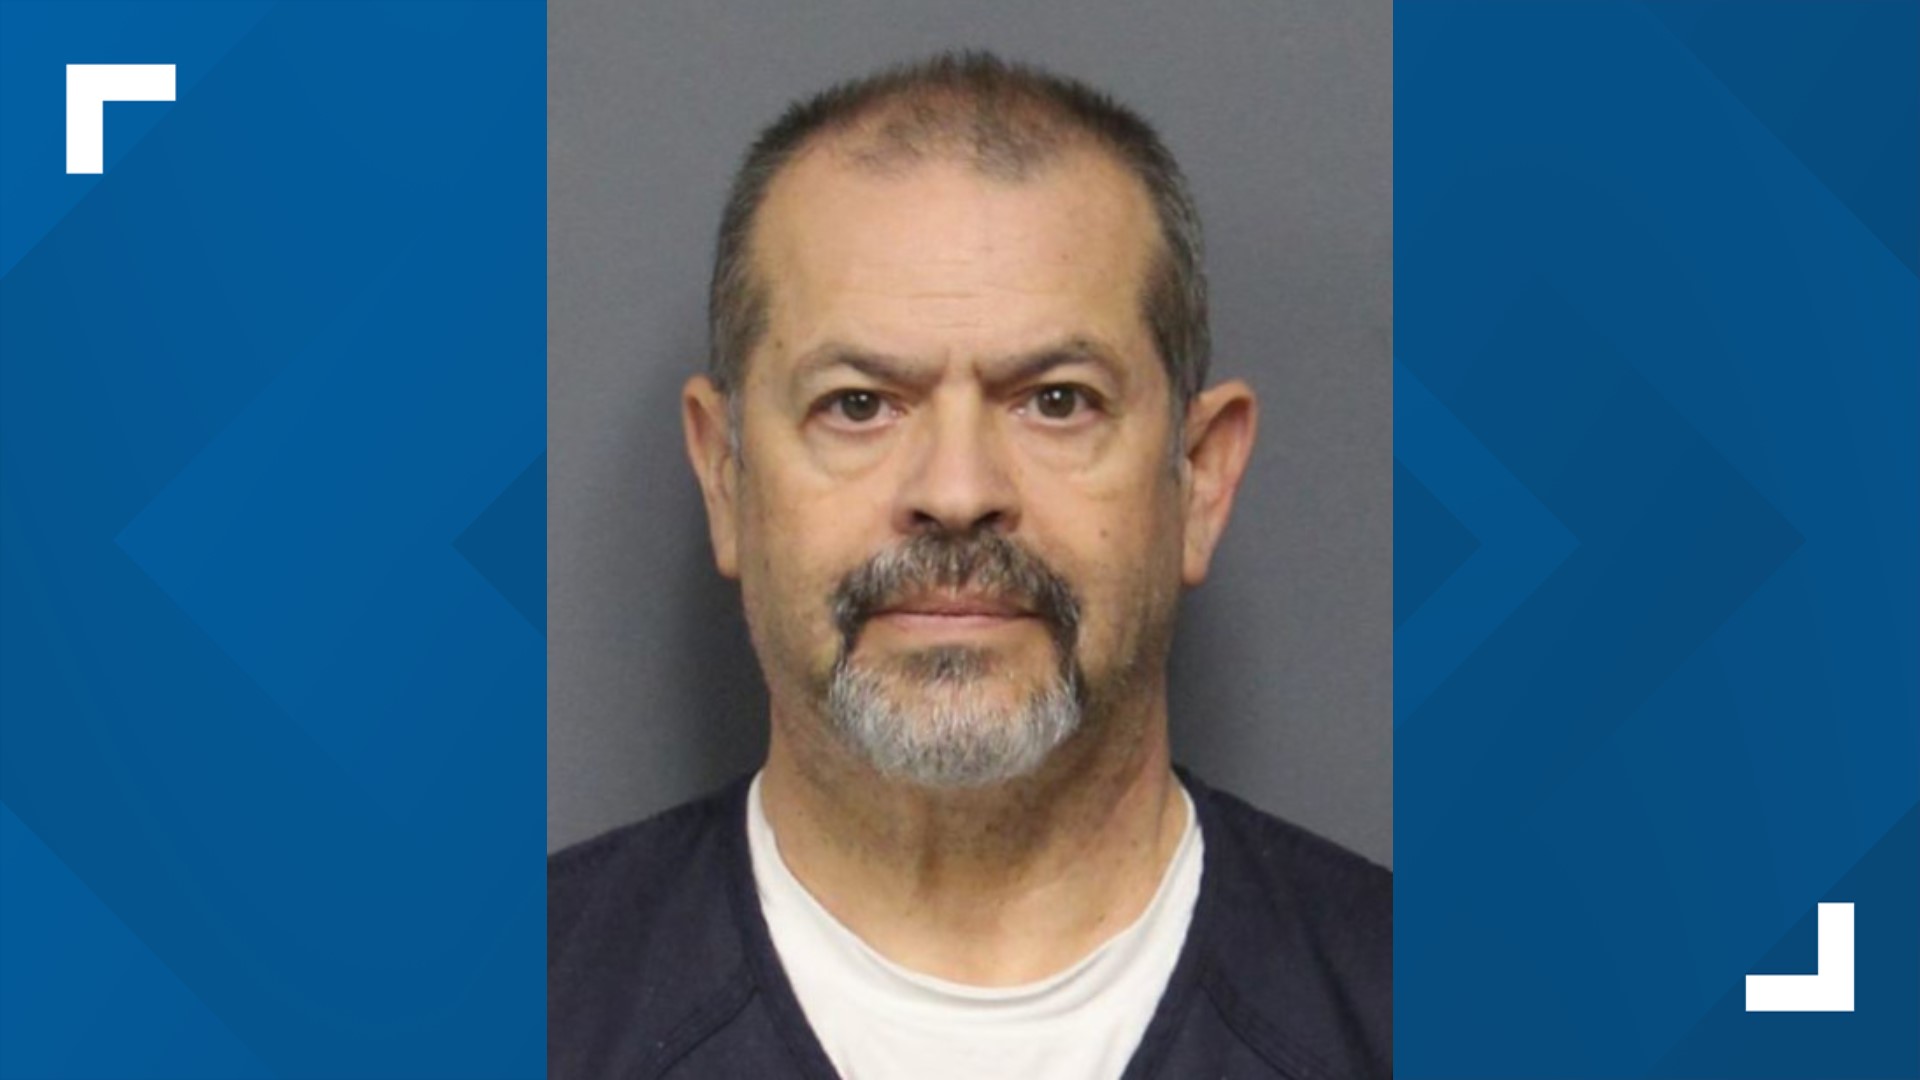 Luis Sierra, who state police say killed a woman and dumped her body more than 40 years ago in Carbon County, is back in Pennsylvania.